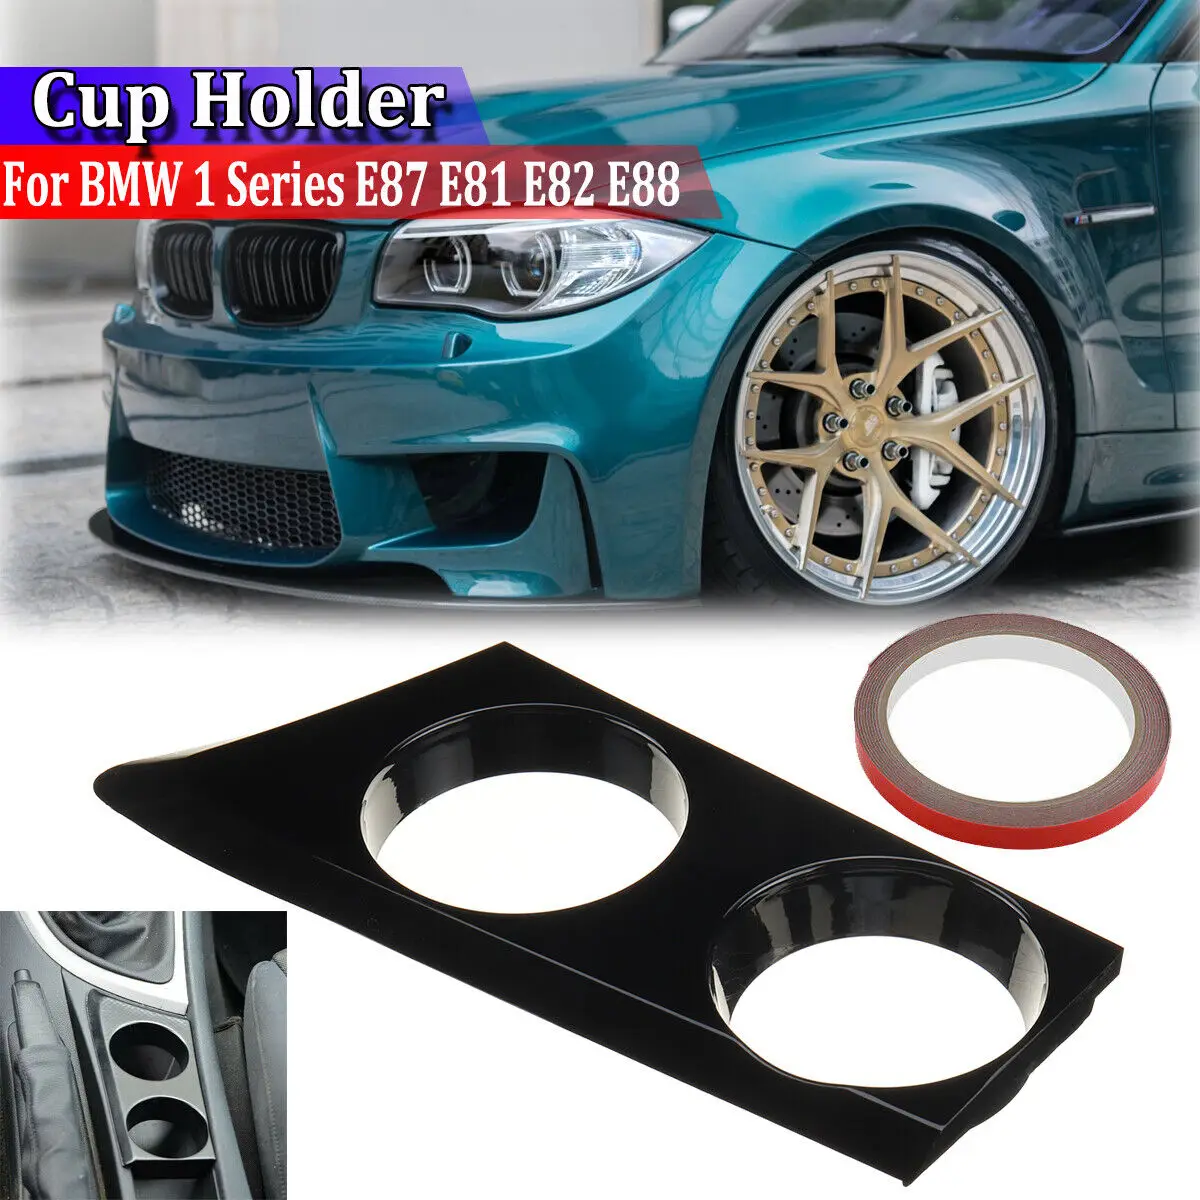 

Car Cup Holder Front Central Console Drink Bottle Mount Stand For BMW 1 Series E81 E82 E87 E88 116i 118i 118d 120i 2005-2019